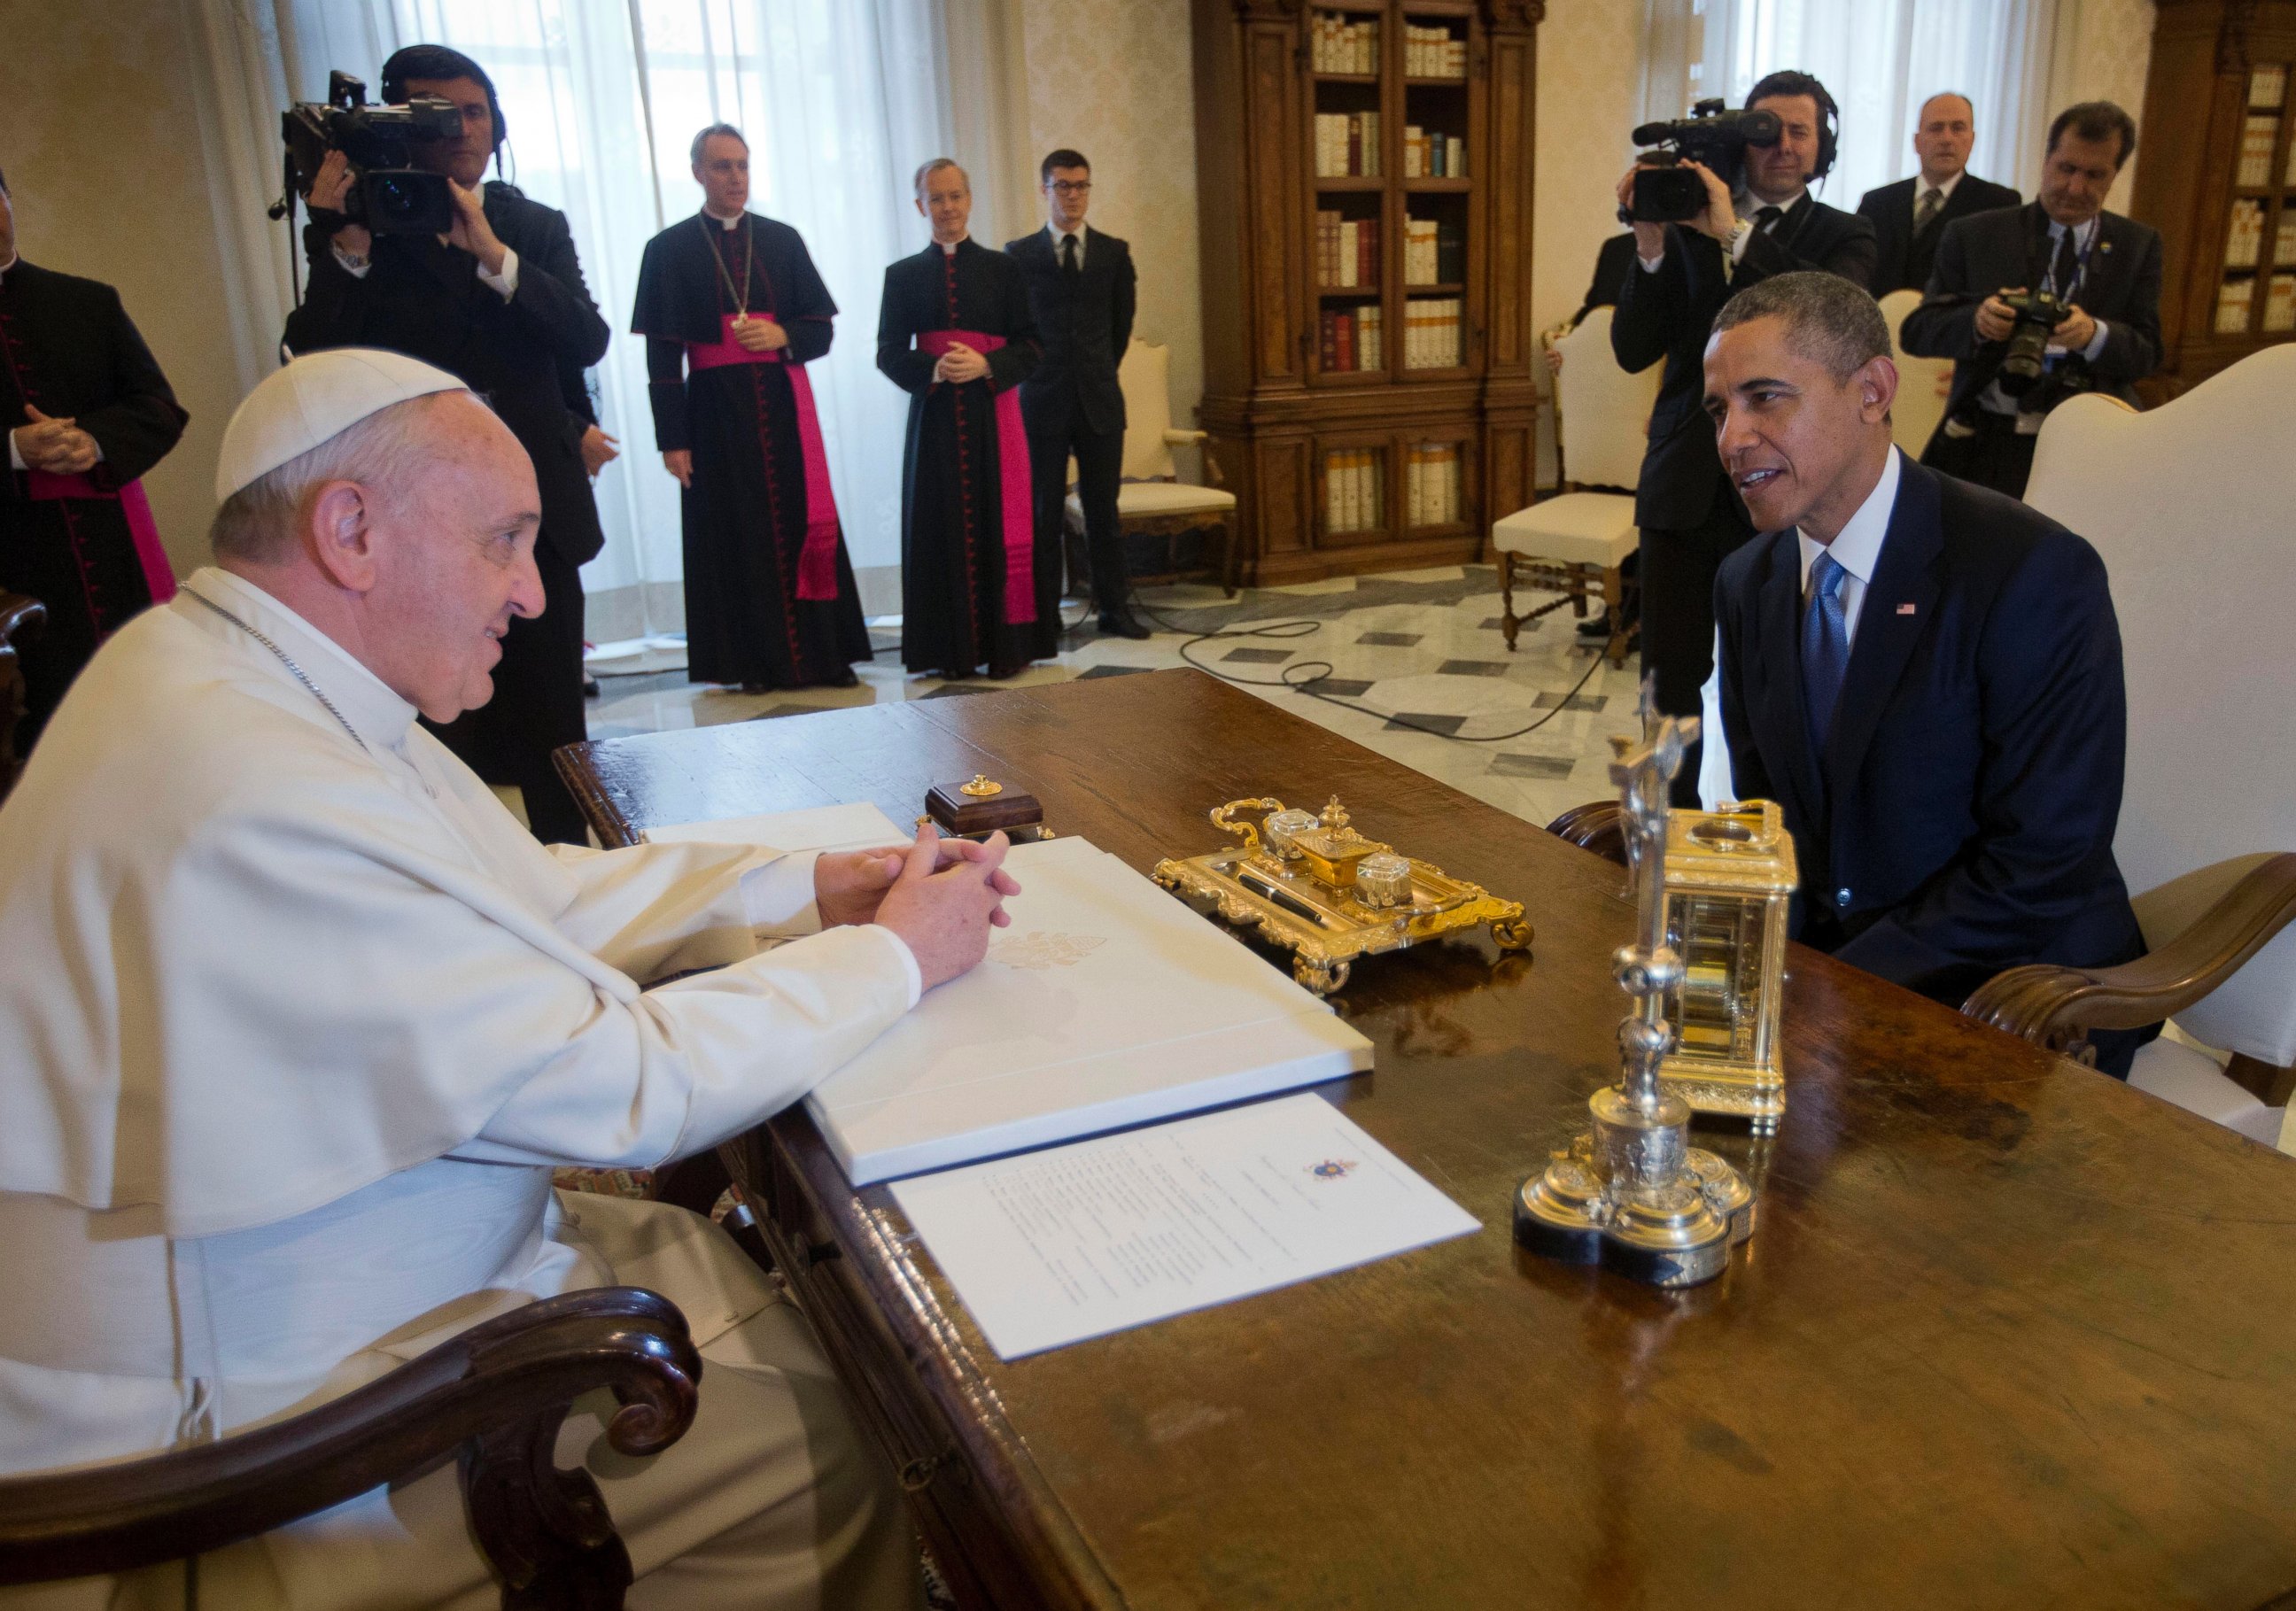 PHOTO: U.S. President Barack Obama meets with Pope Francis, March 27, 2014 at the Vatican.